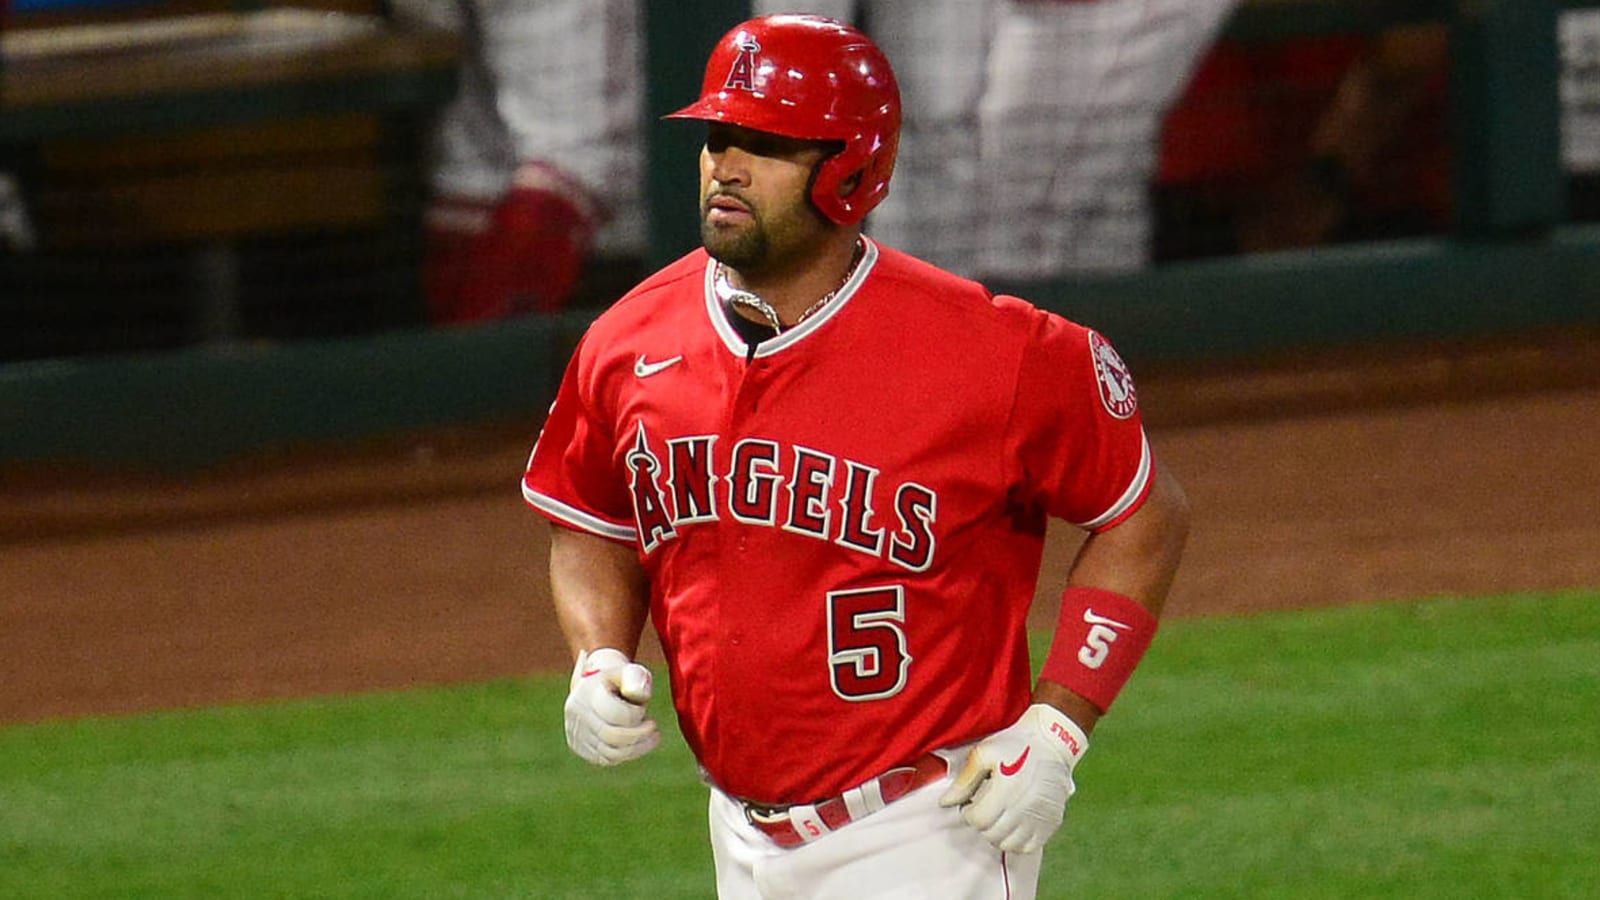 Pujols explains decision to sign with Dodgers